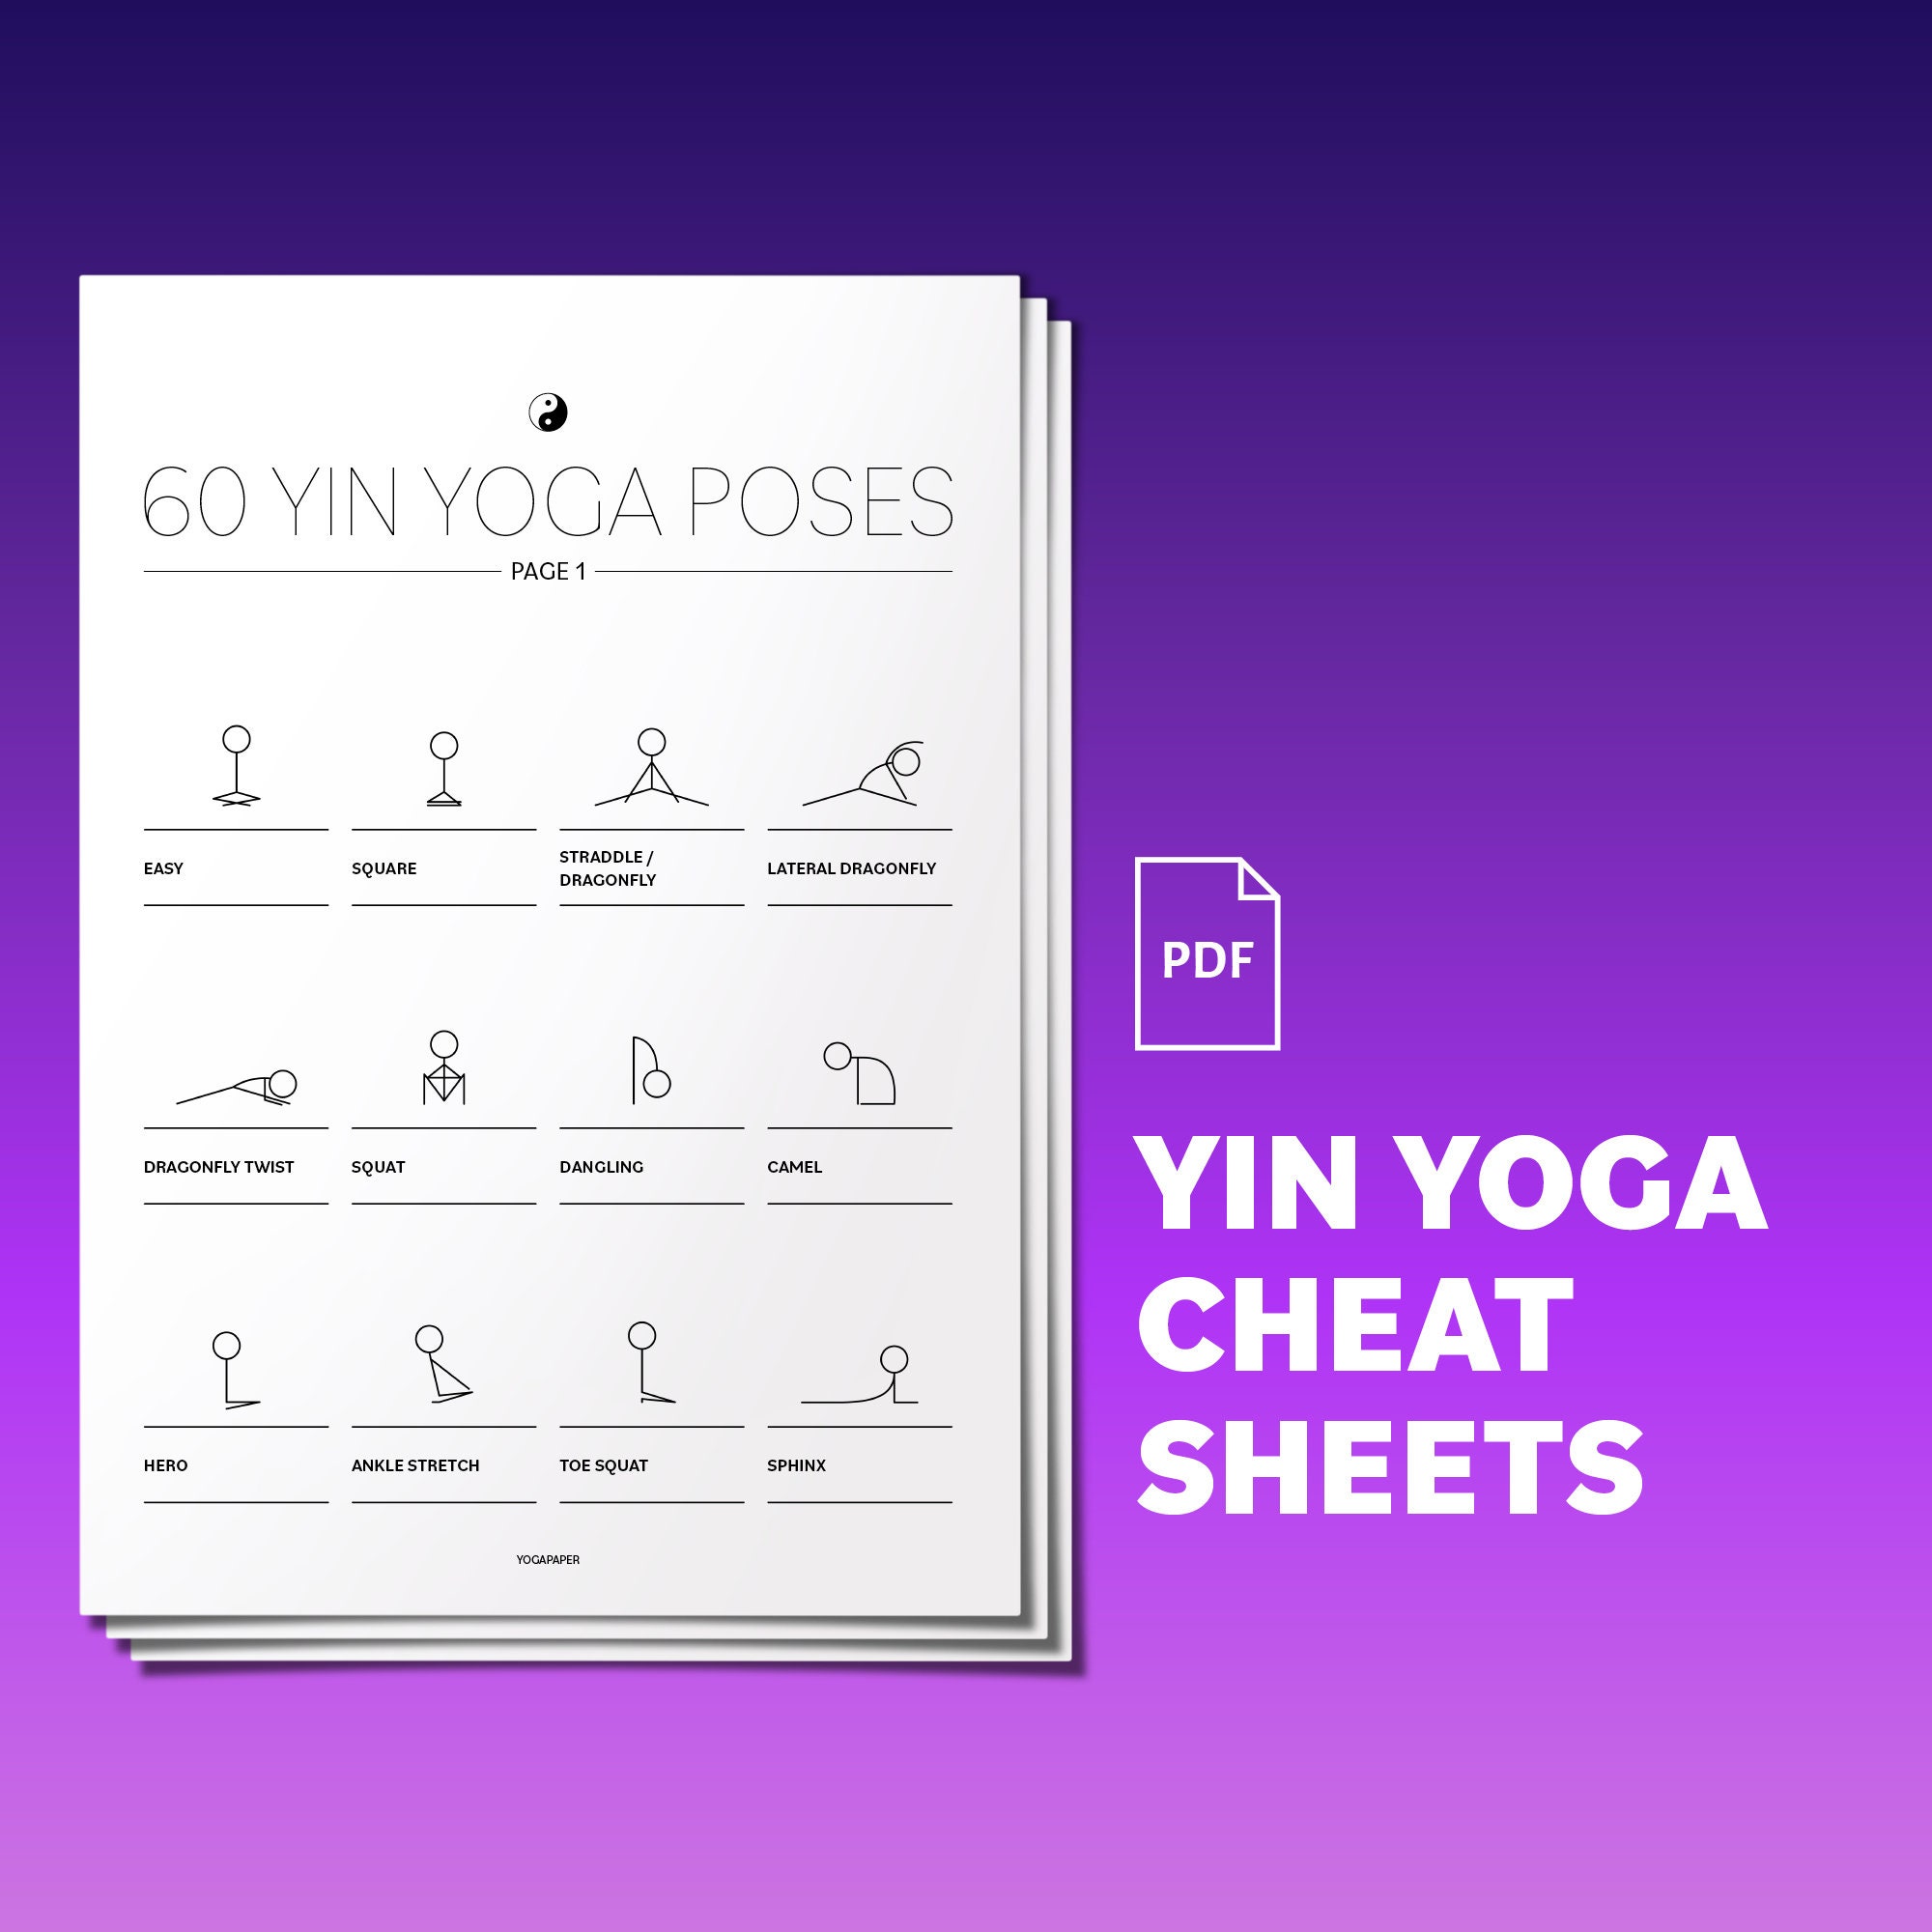 Yin Yoga 101: Everything You Need to Know About The Practice | mindbodygreen